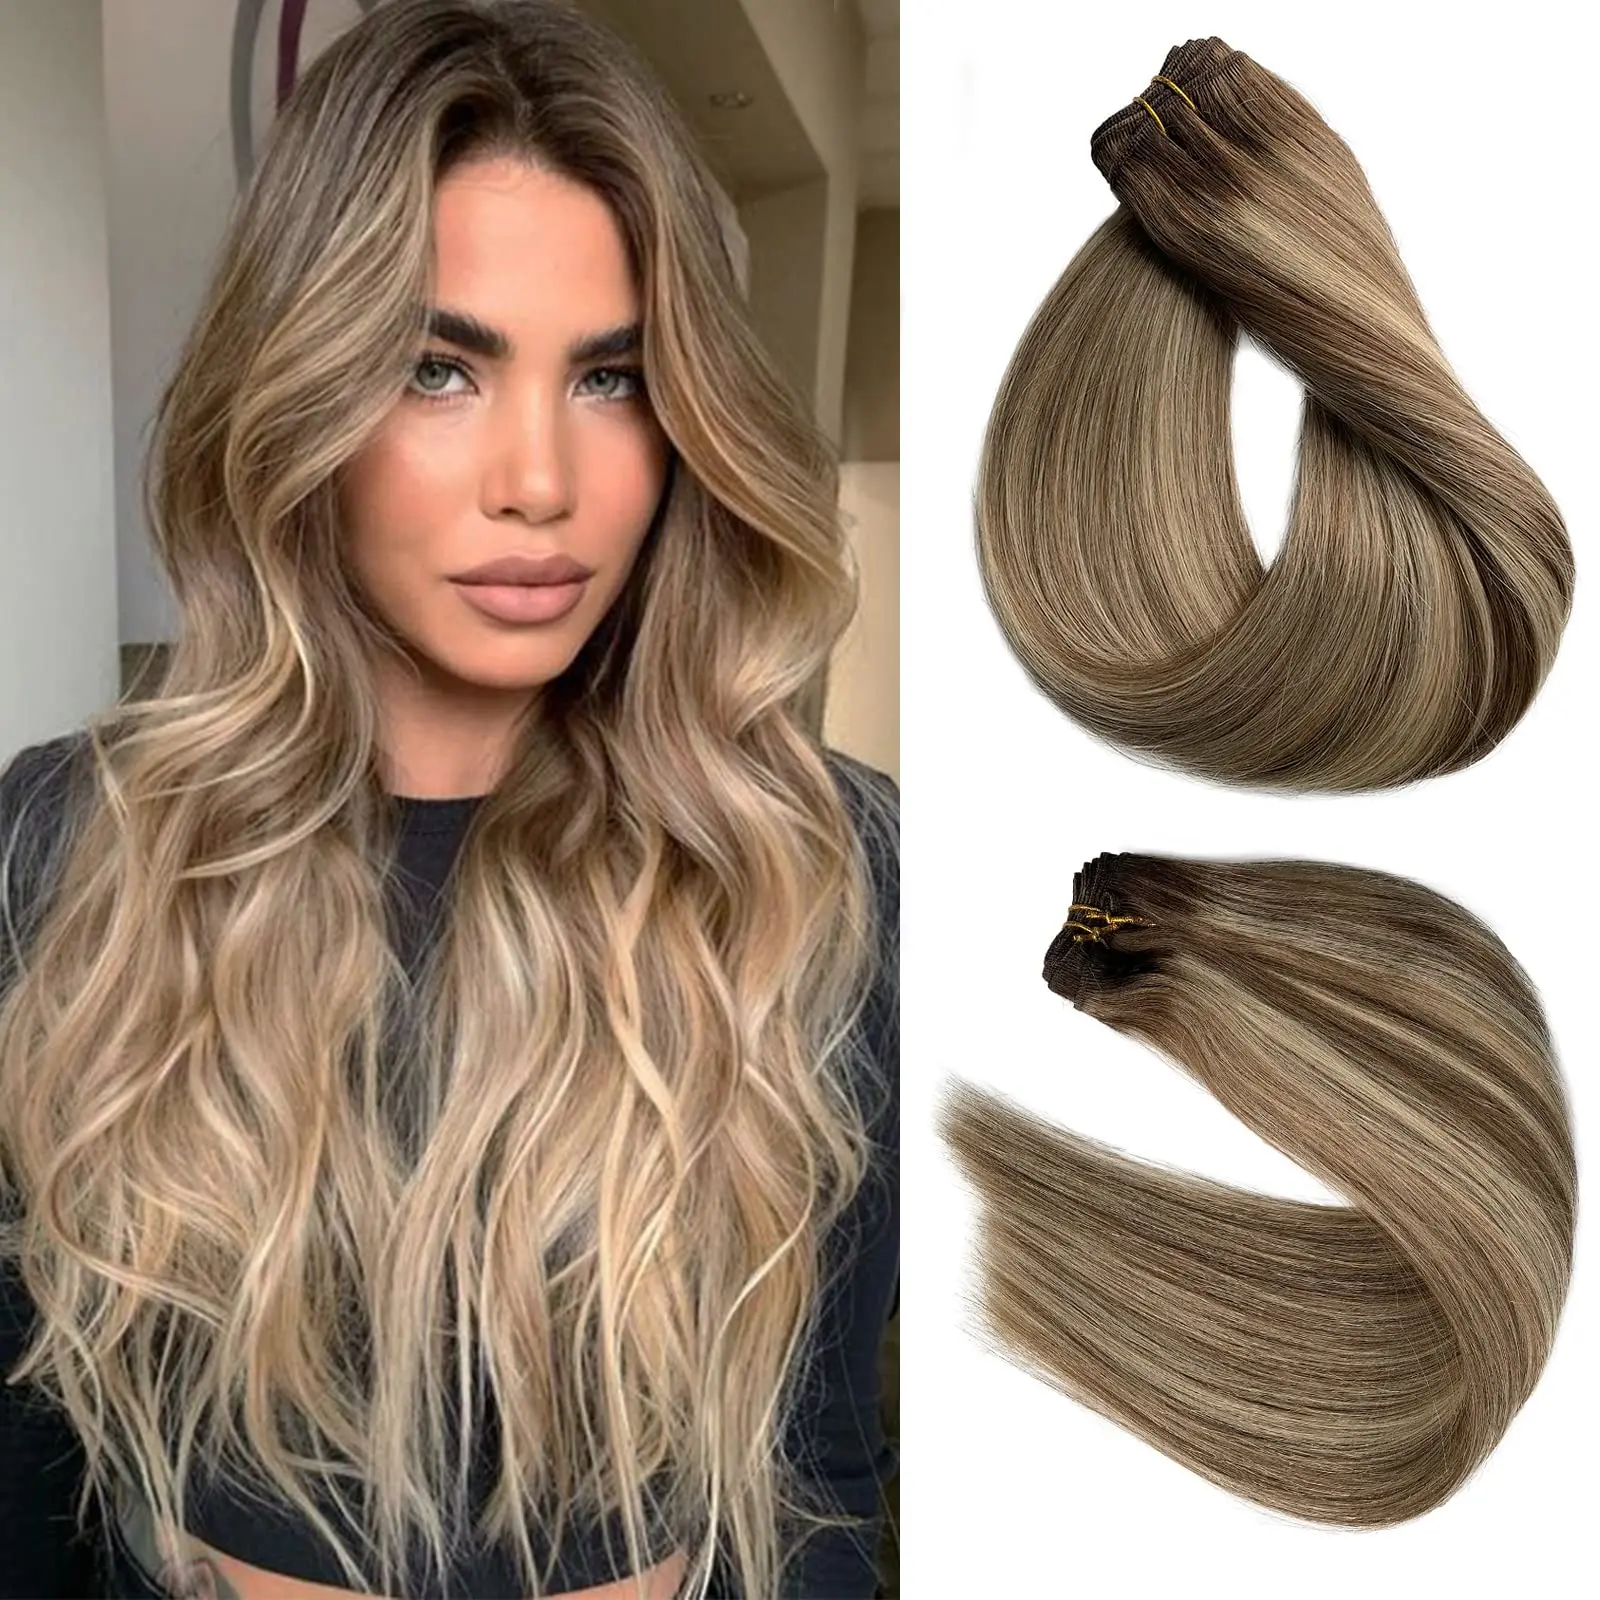 Blonde Highlights Hair Extensions Human Hair Ombre Brown Balayage Bundles Straight Brazilian Remy Hair Sew In Weft Extensions